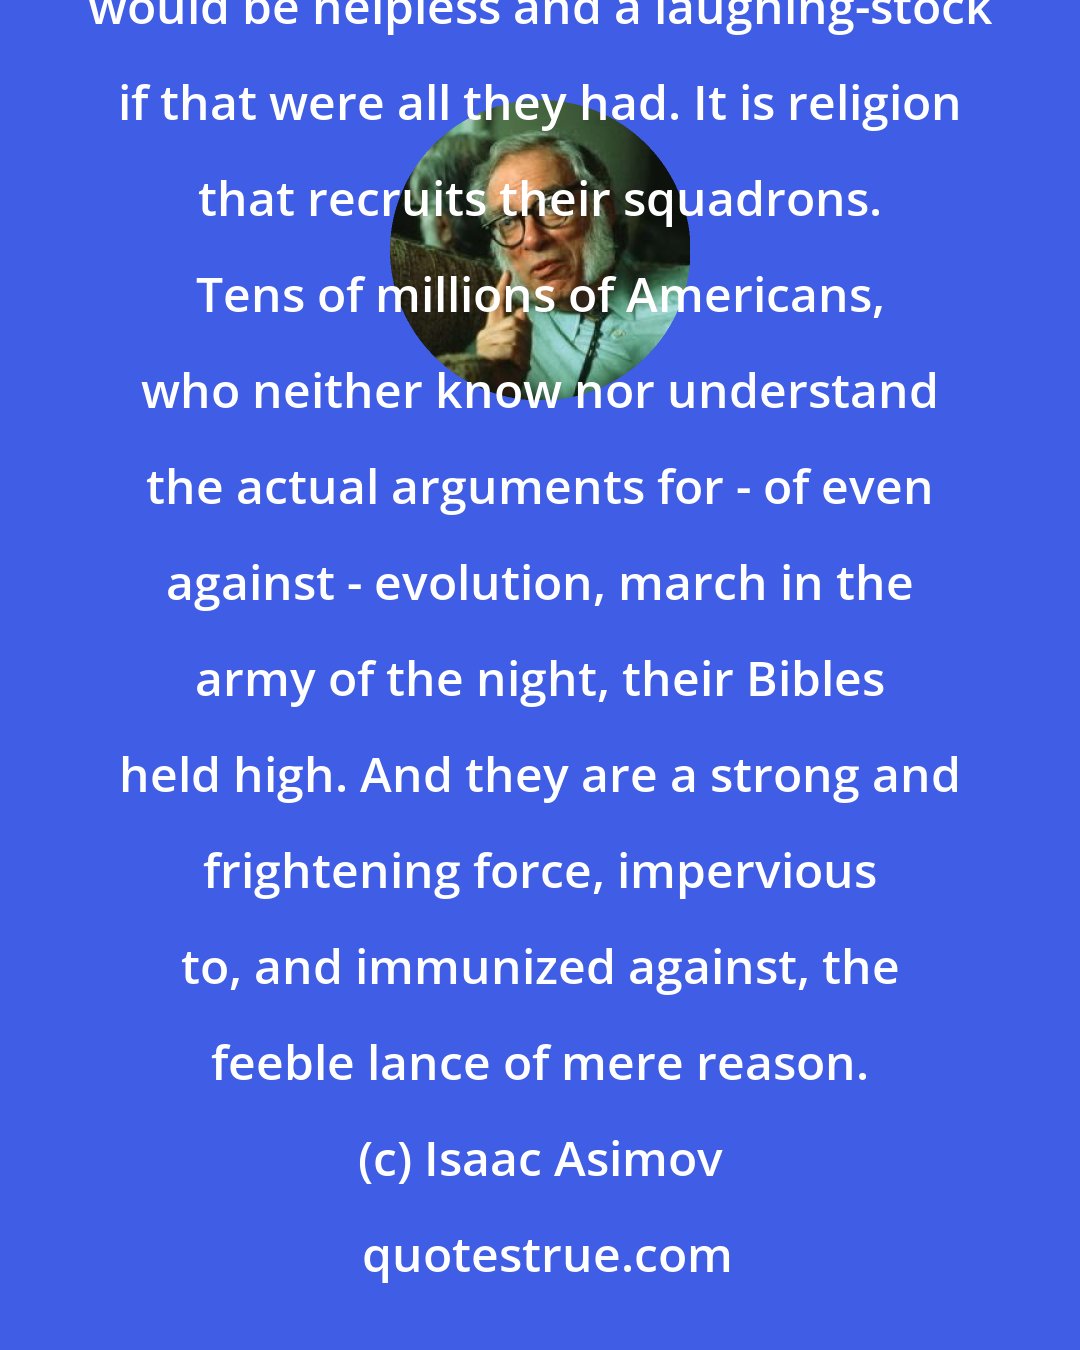 Isaac Asimov: However much the creationist leaders might hammer away at their scientific and philosophical points, they would be helpless and a laughing-stock if that were all they had. It is religion that recruits their squadrons. Tens of millions of Americans, who neither know nor understand the actual arguments for - of even against - evolution, march in the army of the night, their Bibles held high. And they are a strong and frightening force, impervious to, and immunized against, the feeble lance of mere reason.